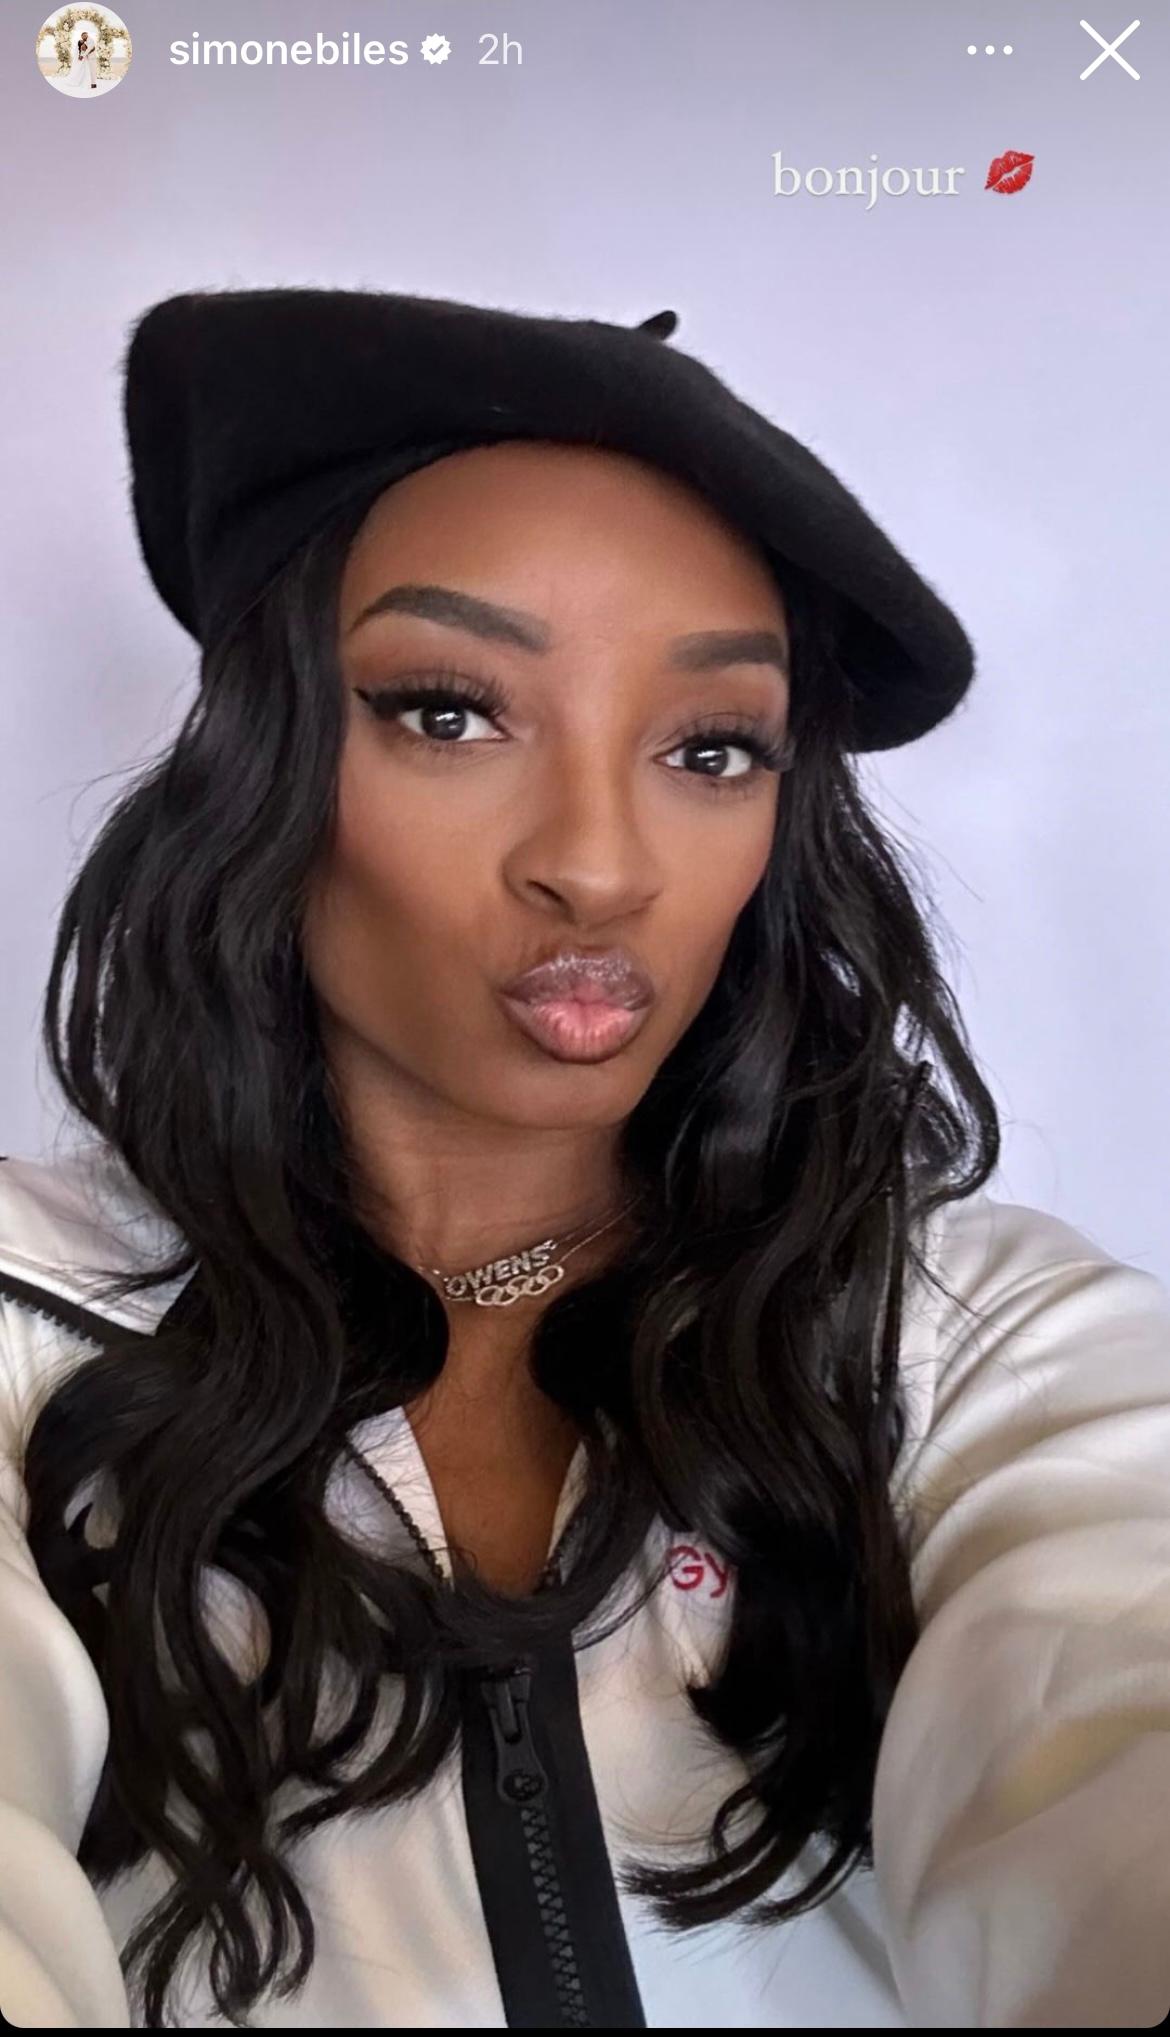 Simone Biles gives duck face while wearing a baret